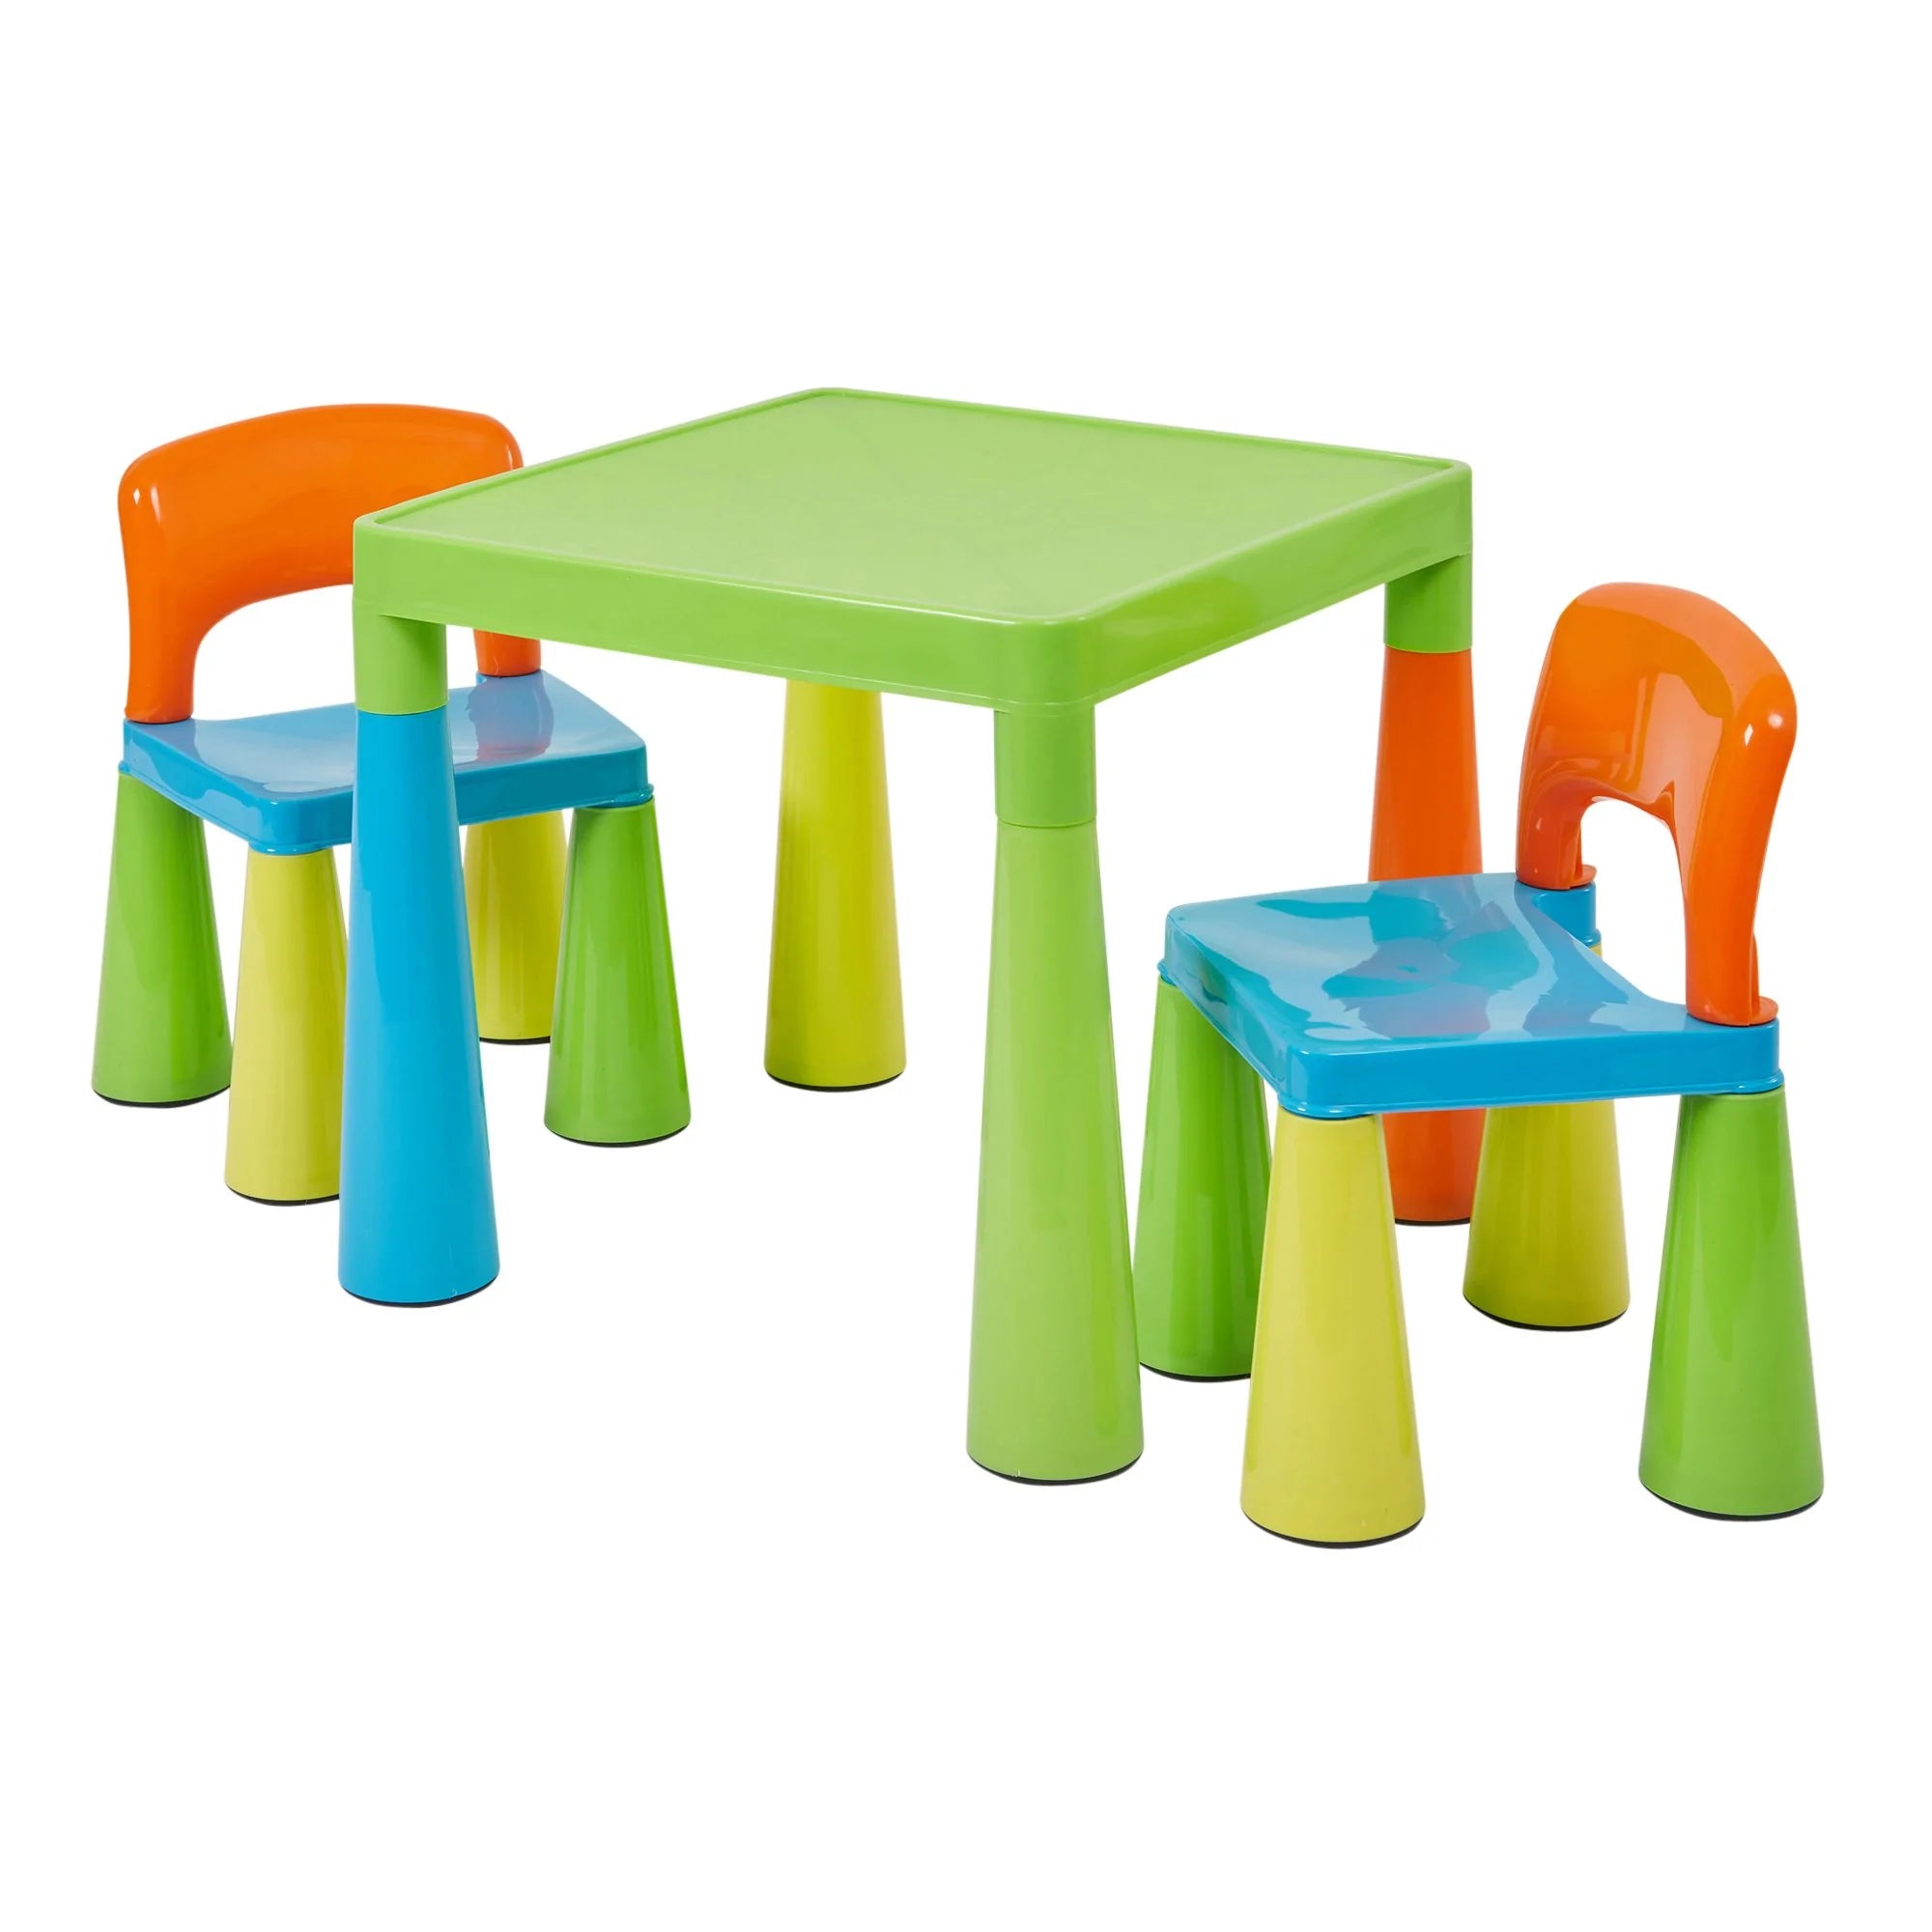 Kids Plastic Table & Chairs - Multi-Coloured